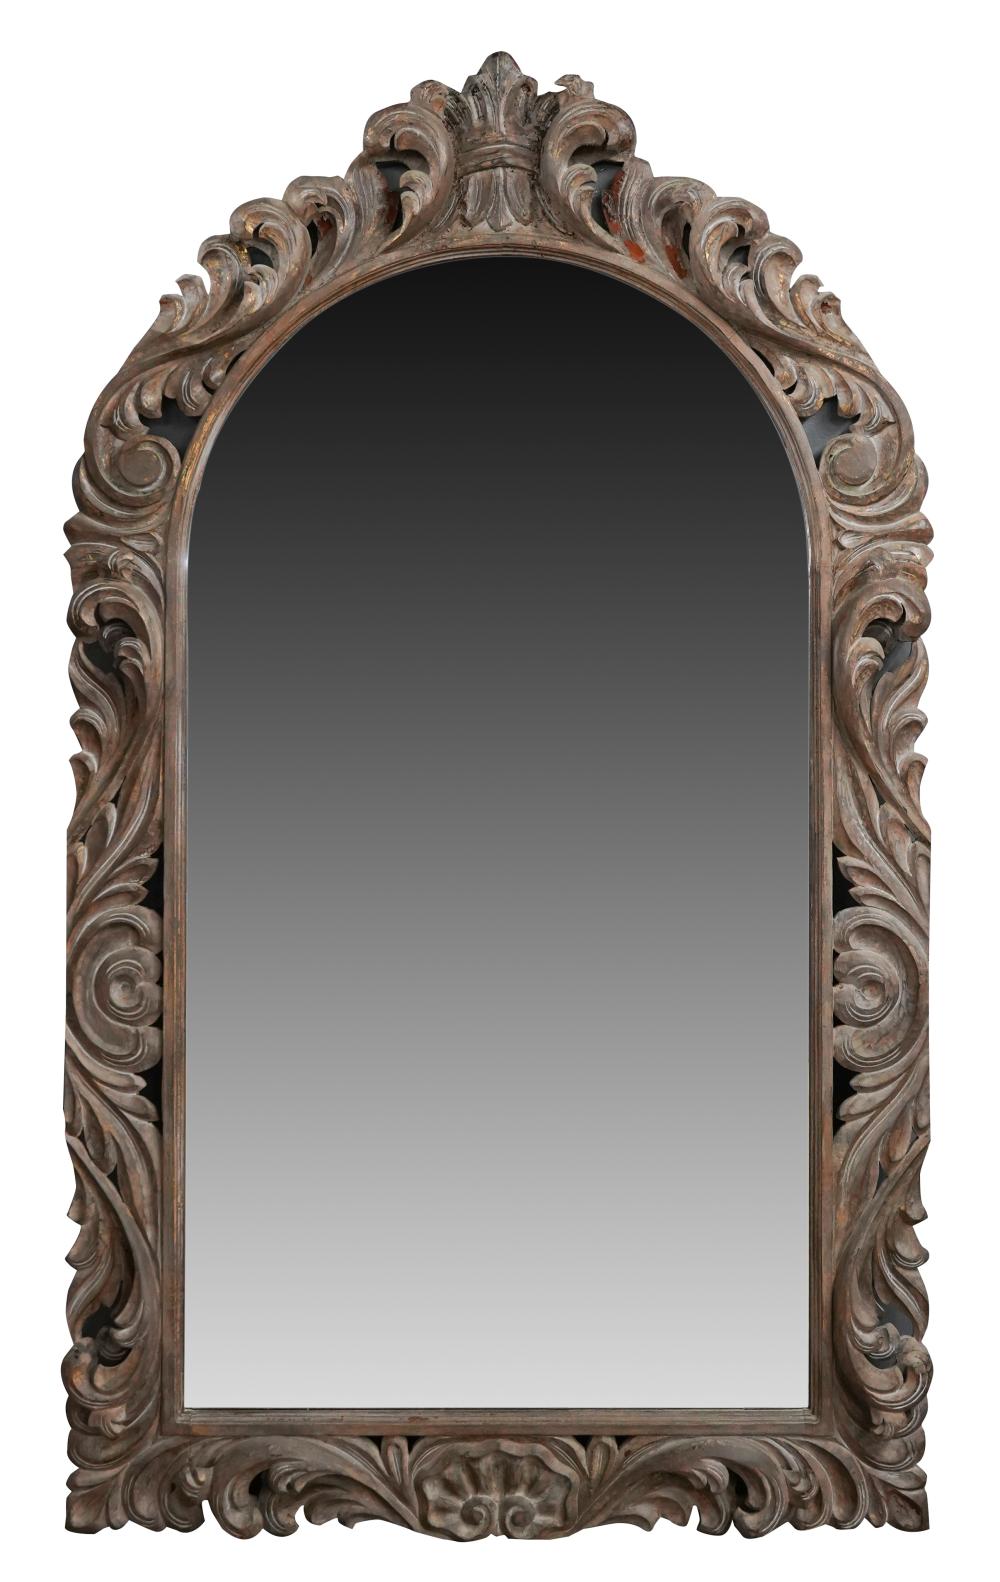 LARGE CARVED WOOD WALL MIRRORthe 33140c